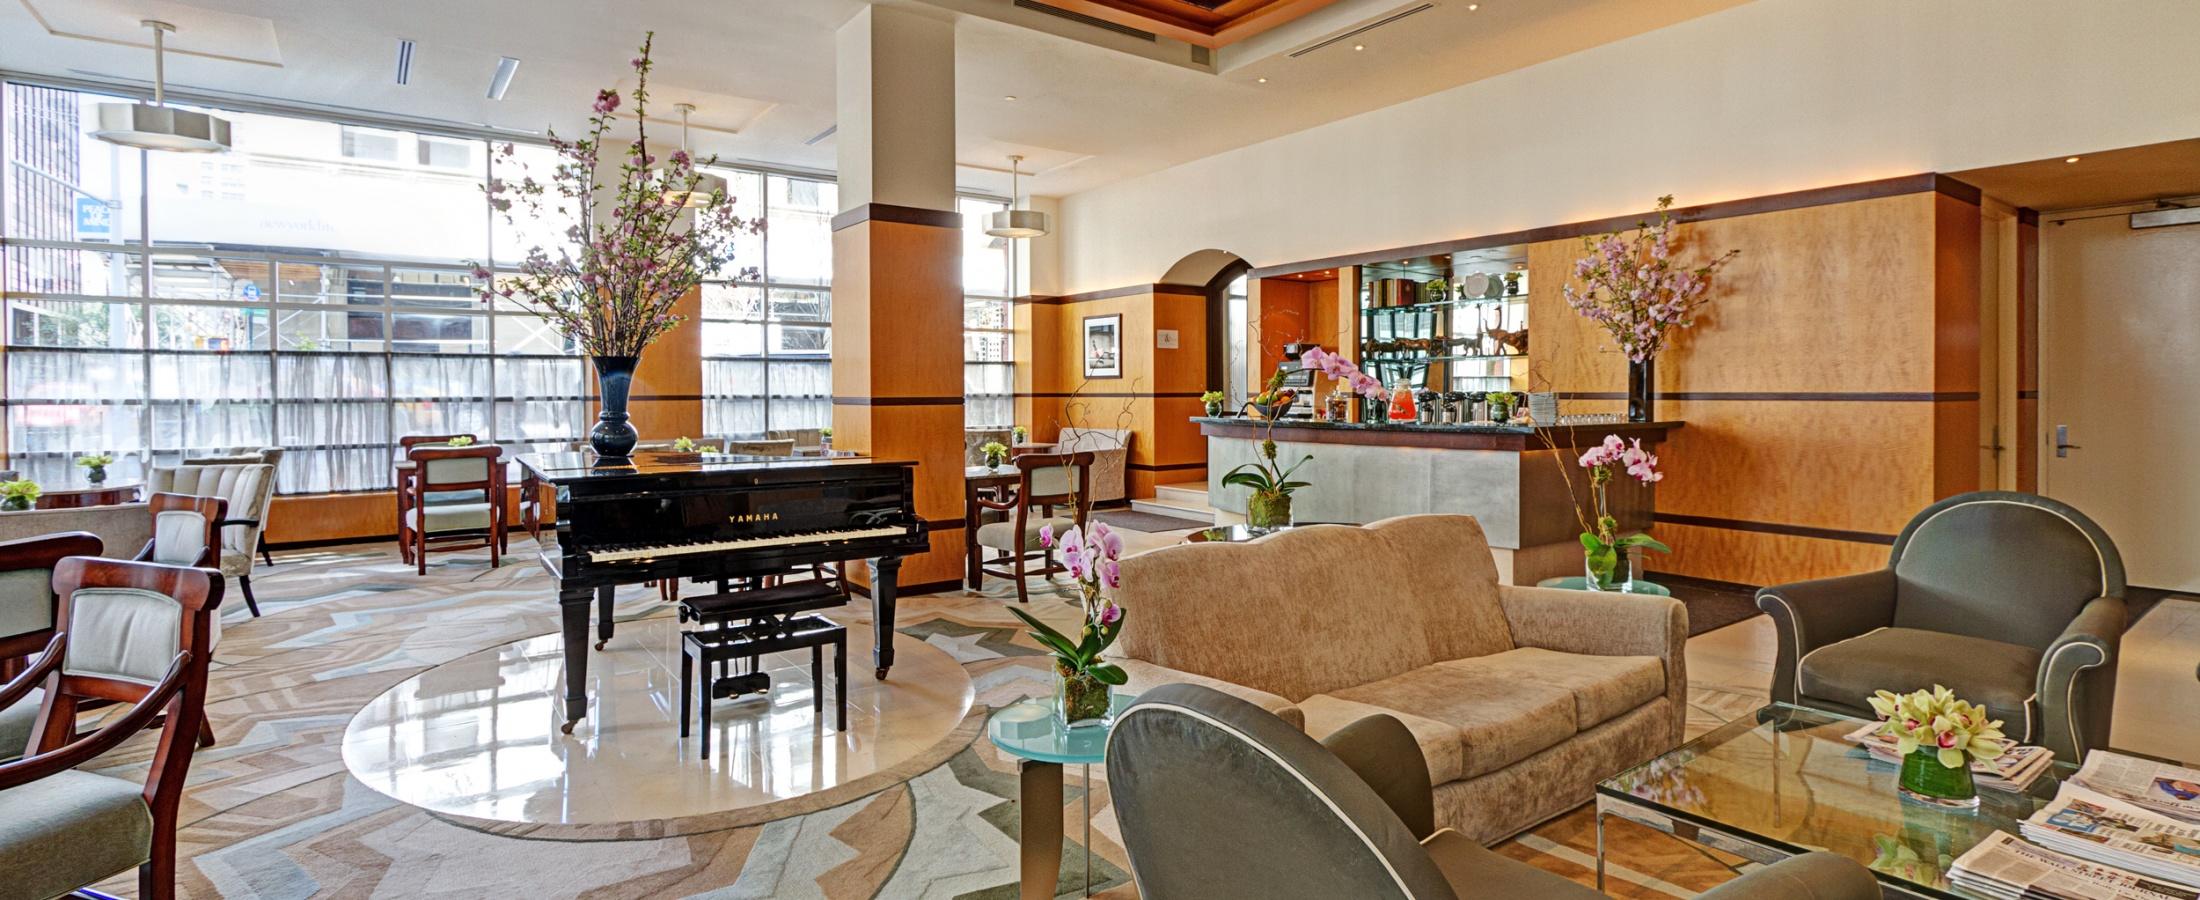 Hotel Giraffes lobby is perfect space for guests to relax with complimentary wi-fi and 24 hour refreshments.